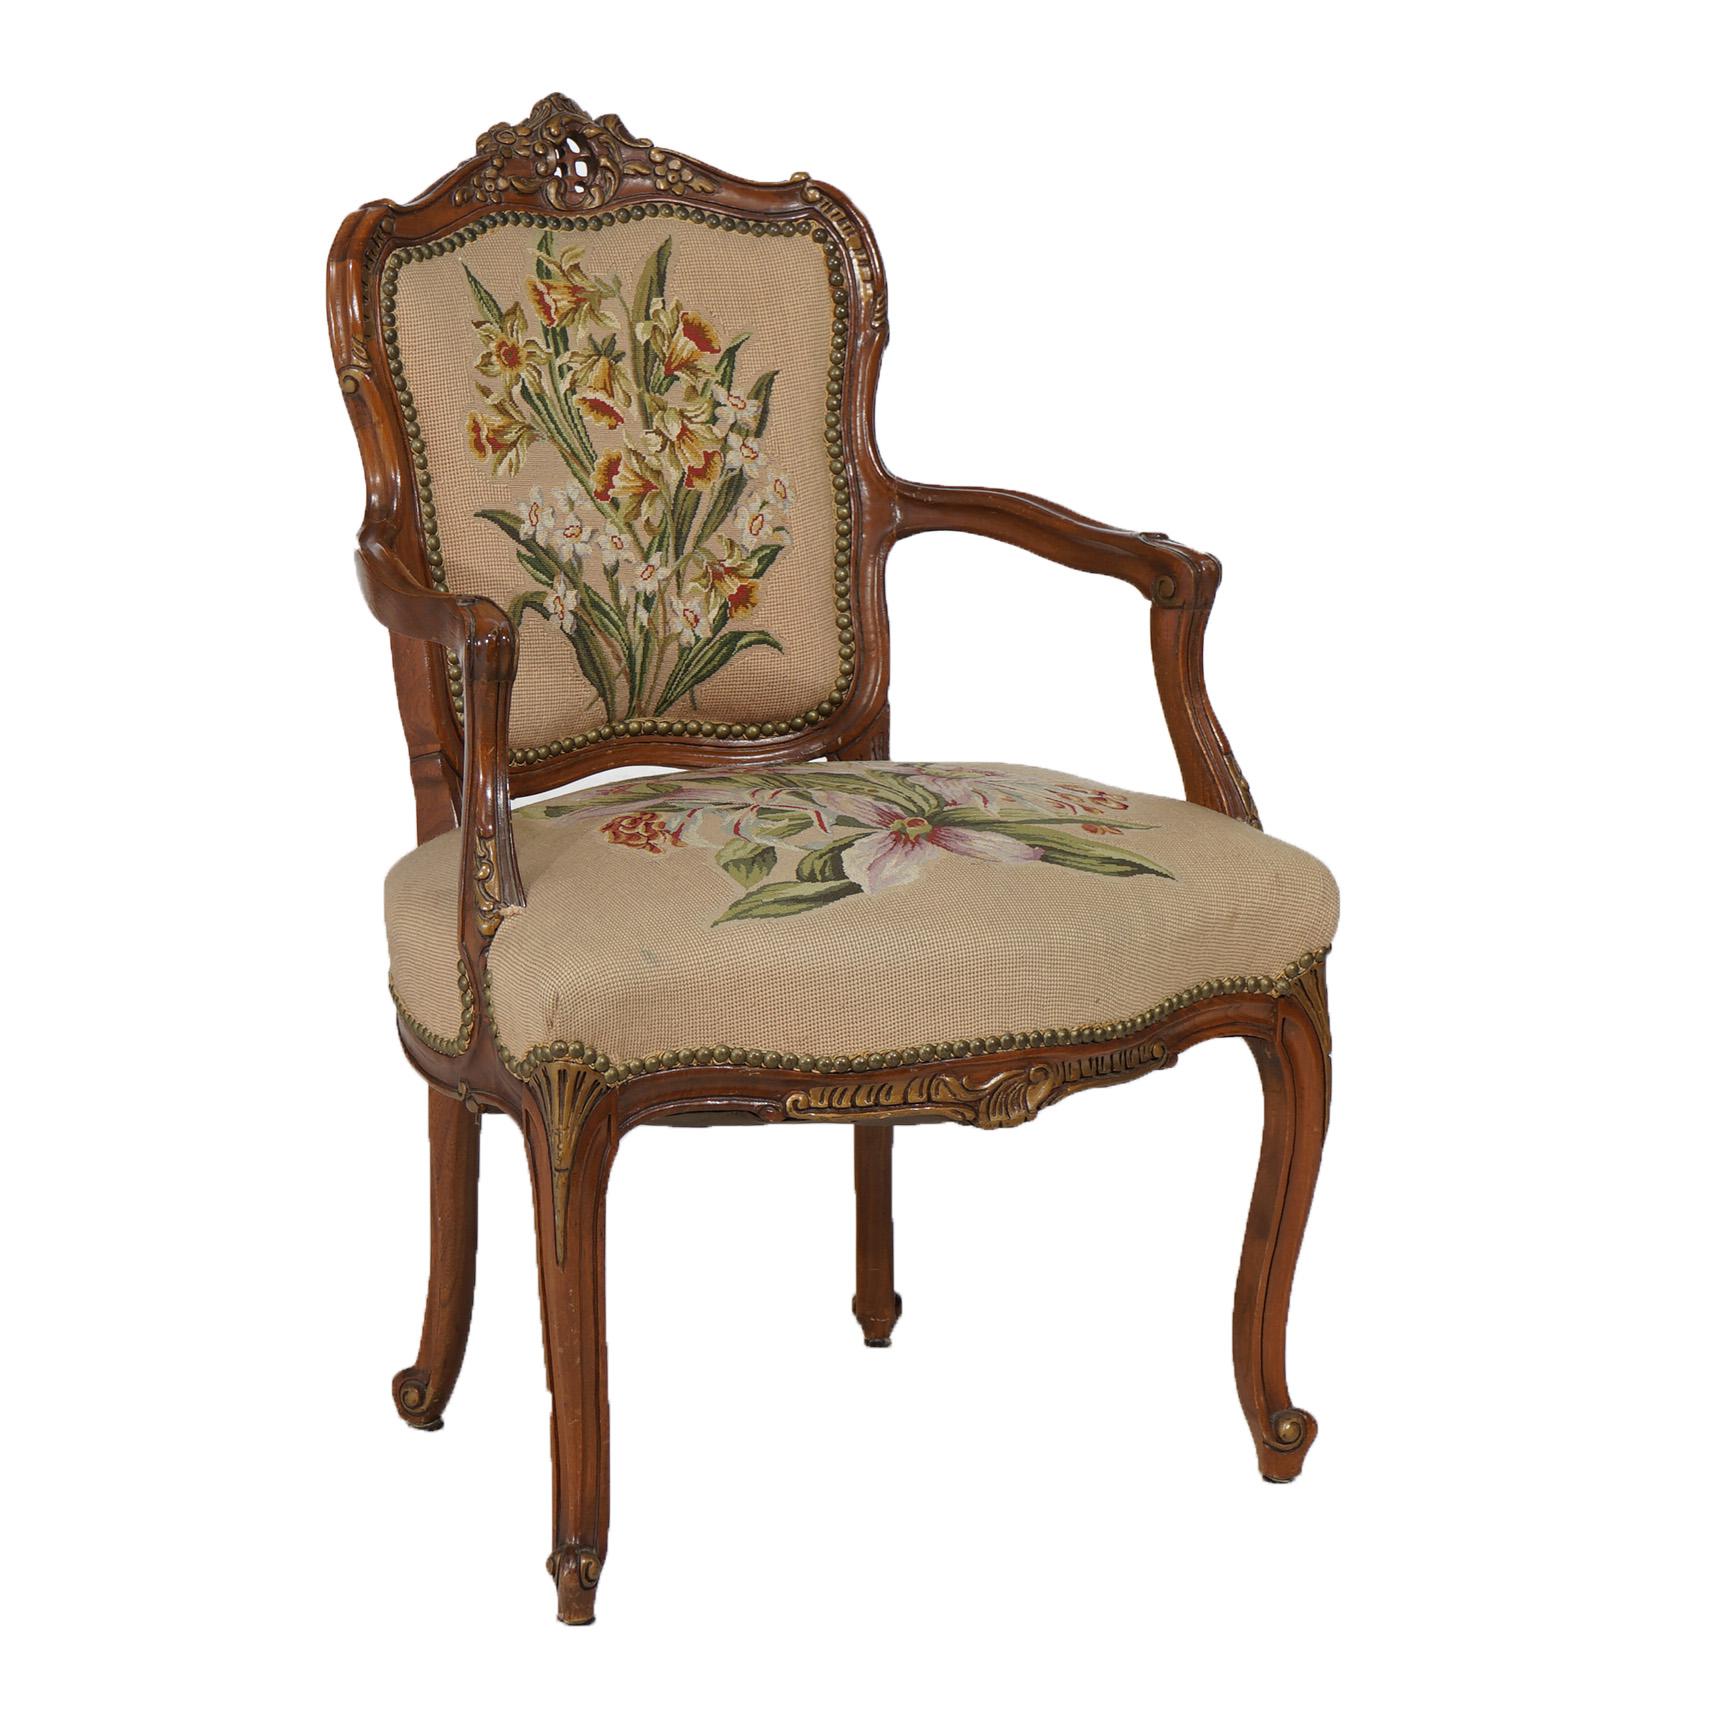 courting chair for sale